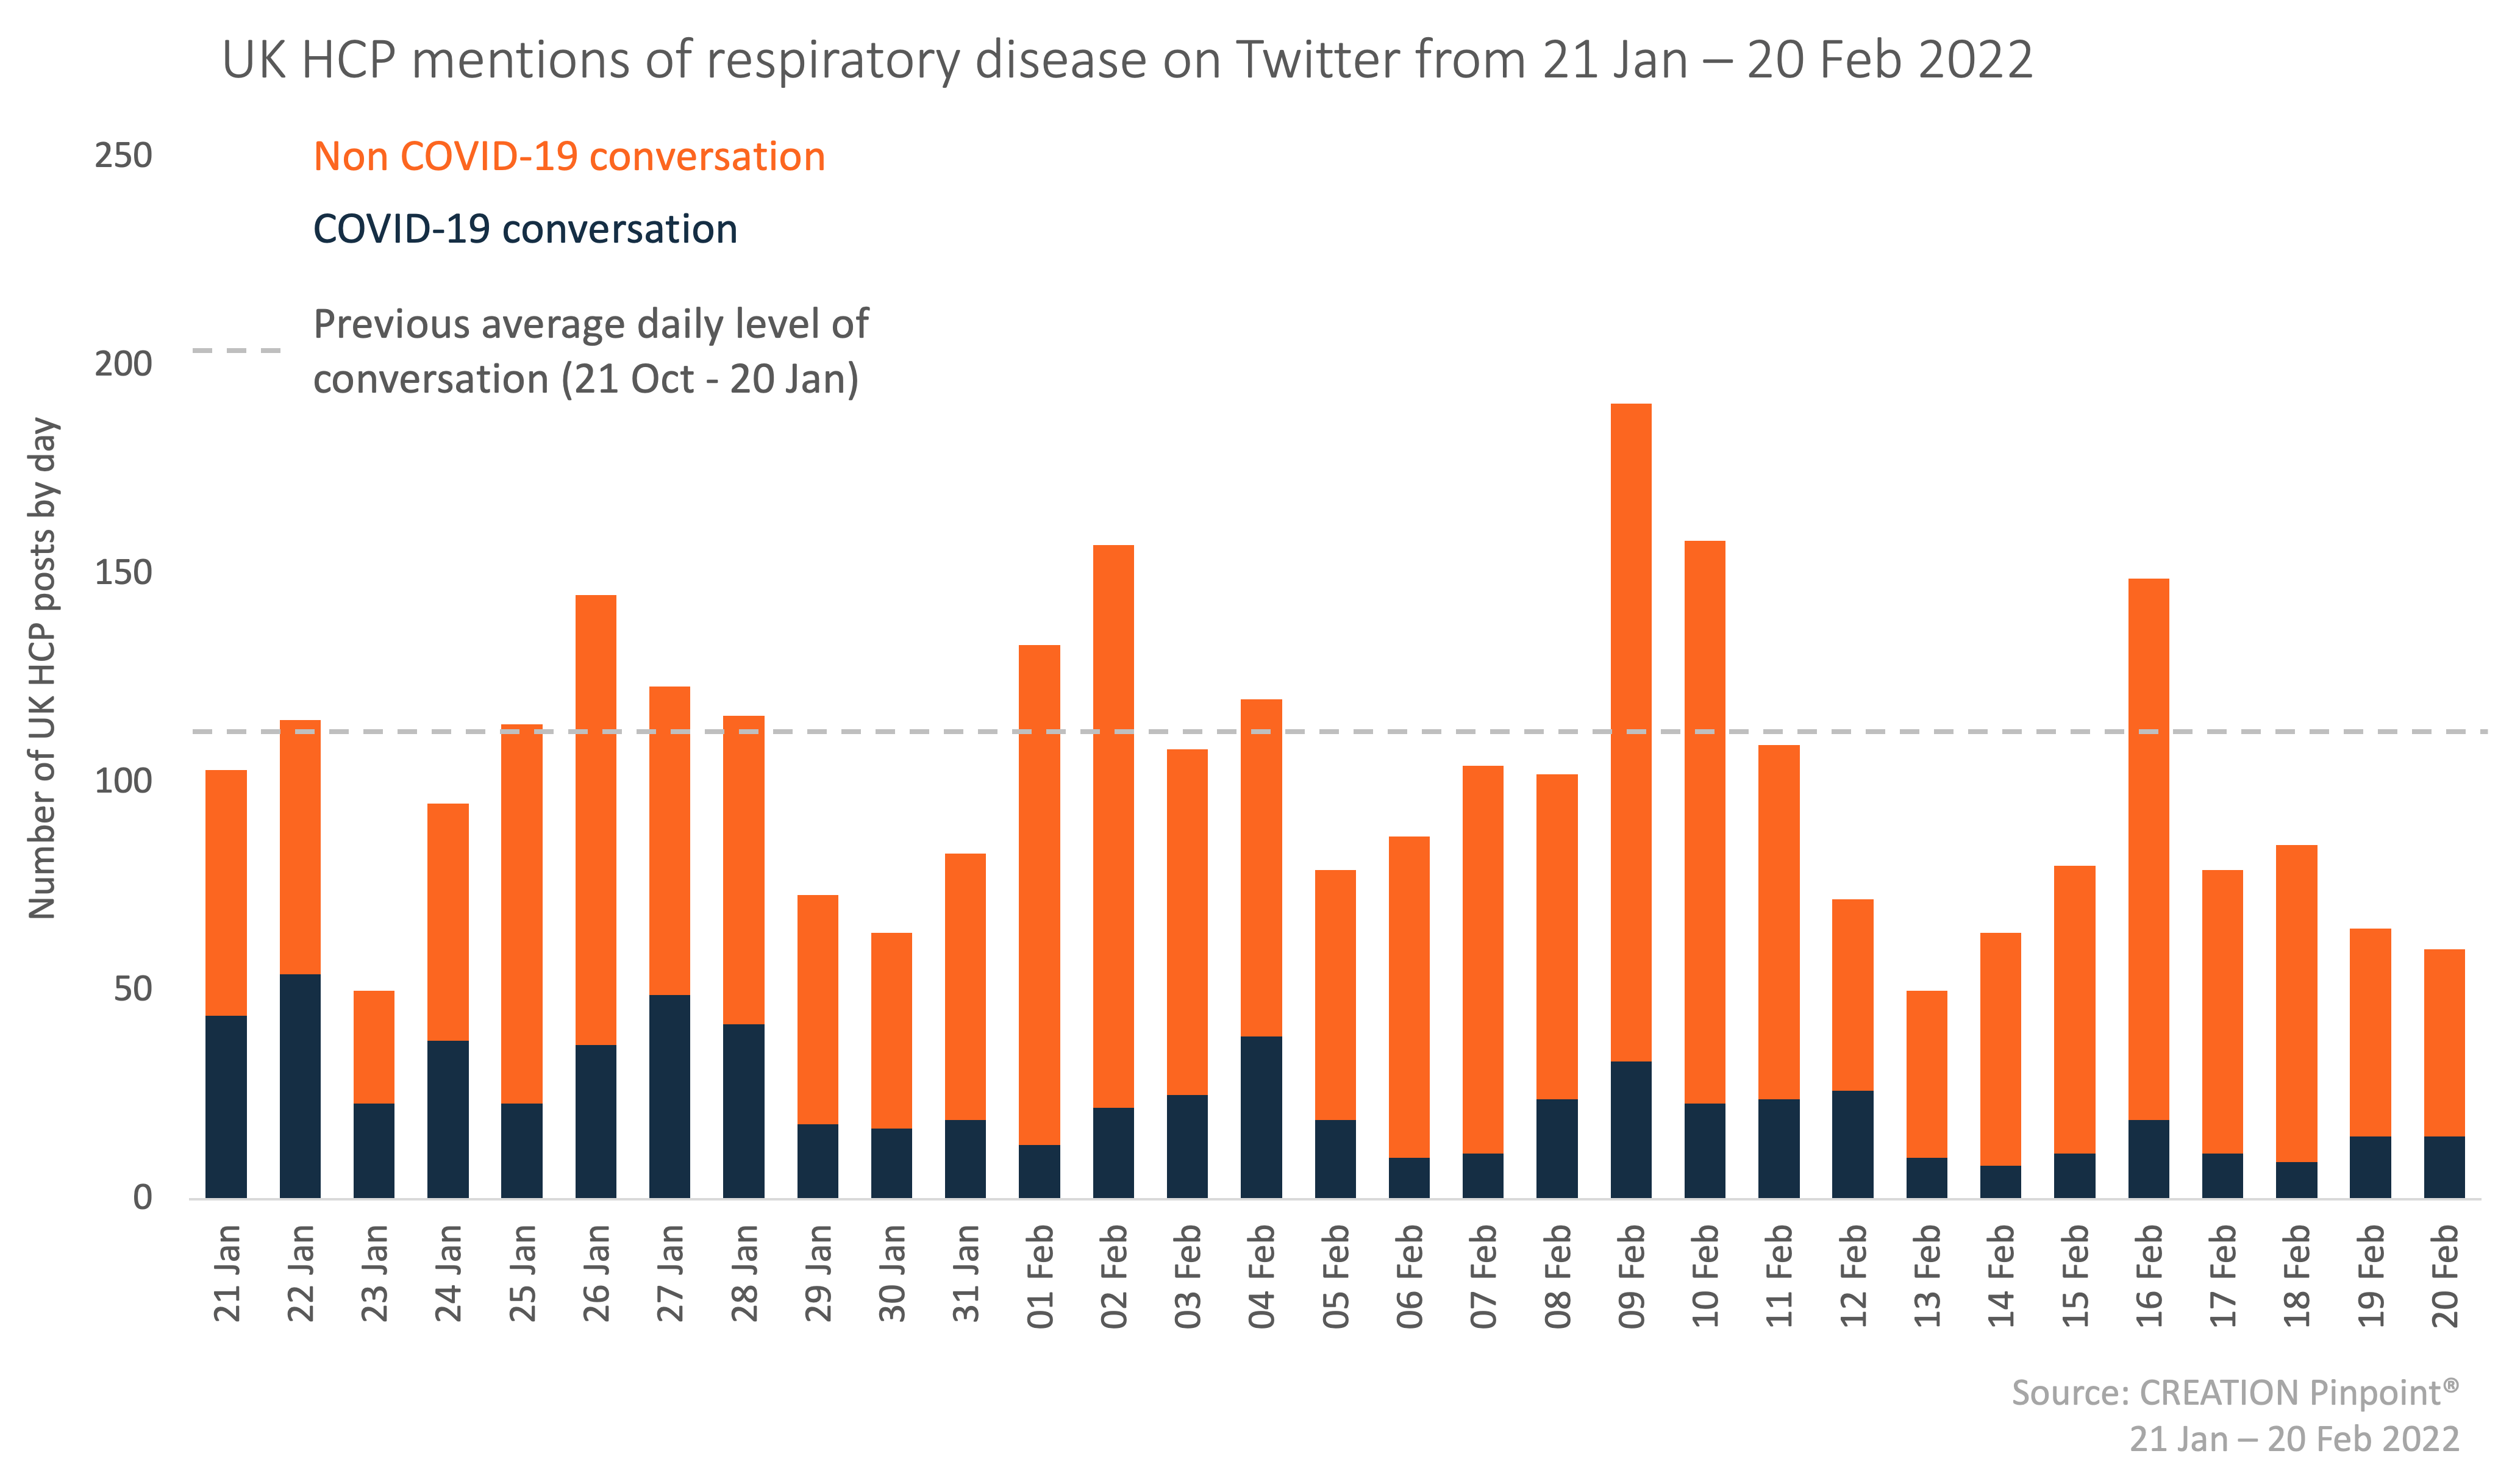 Graph showing UK HCP Mentions of respiratory disease on Twitter from 21 Jan to 20 Feb 2022